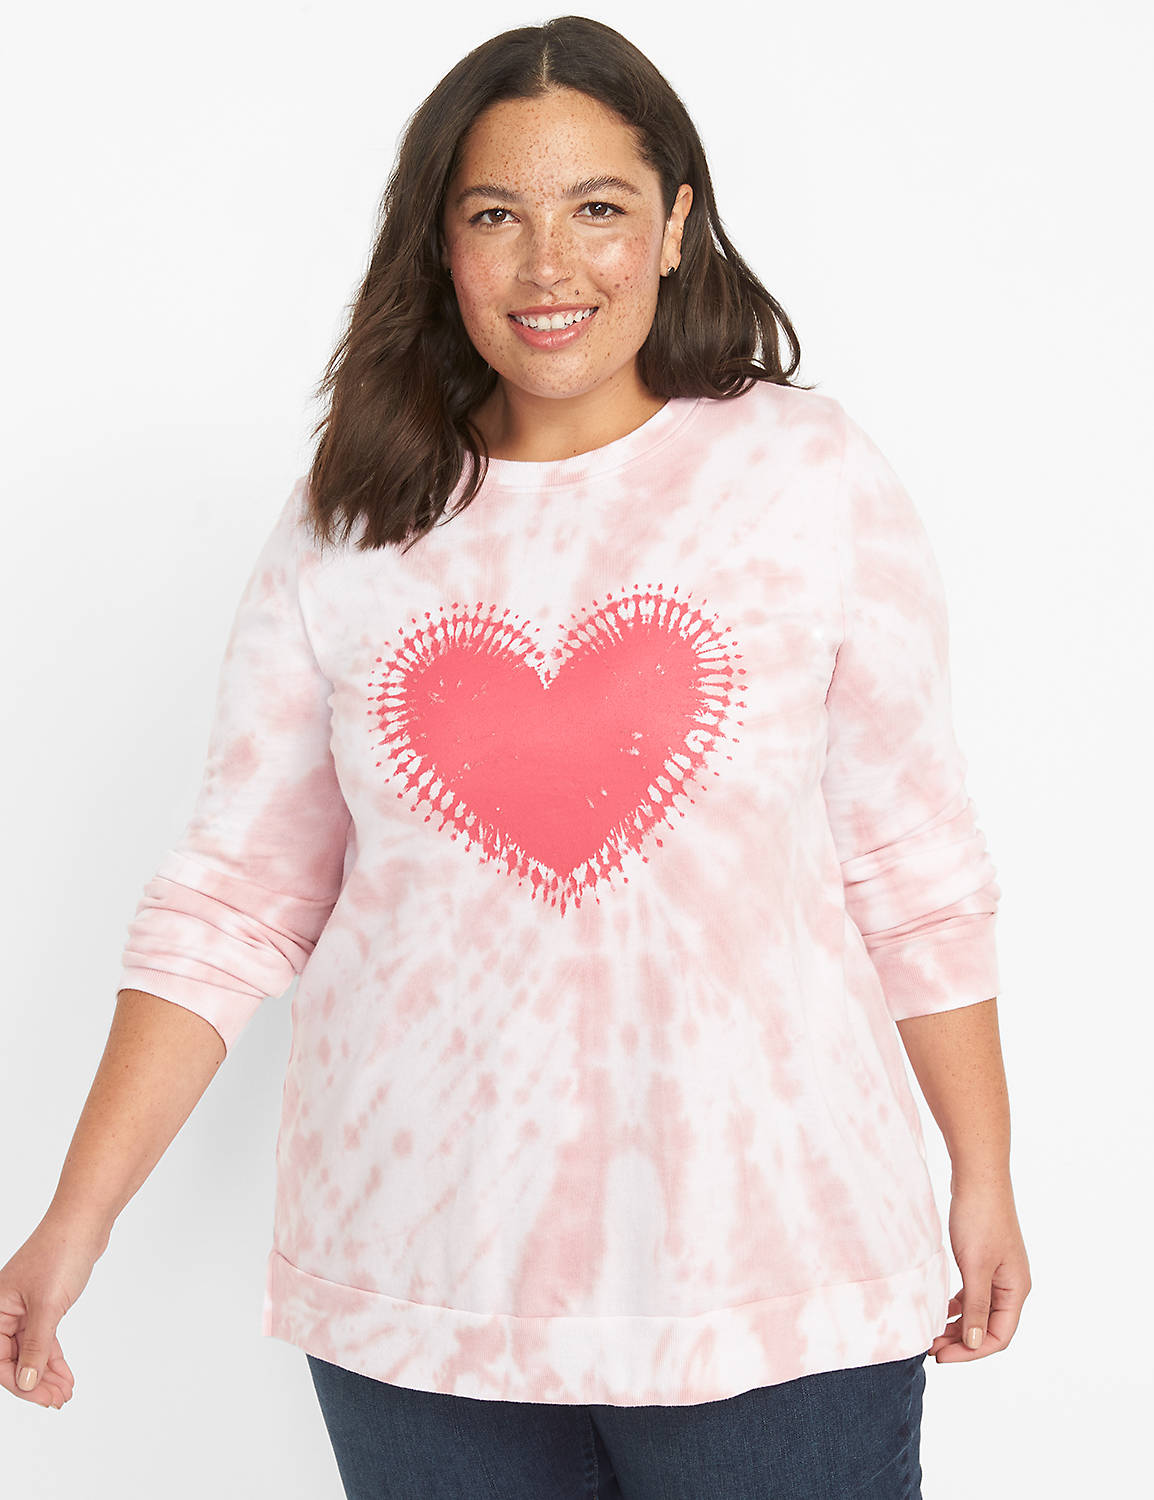 Long Sleeve Crew Neck Sweatshirt with Side Slit Graphic: heart Tie Dye 1124752:AS SAMPLE:10/12 Product Image 1